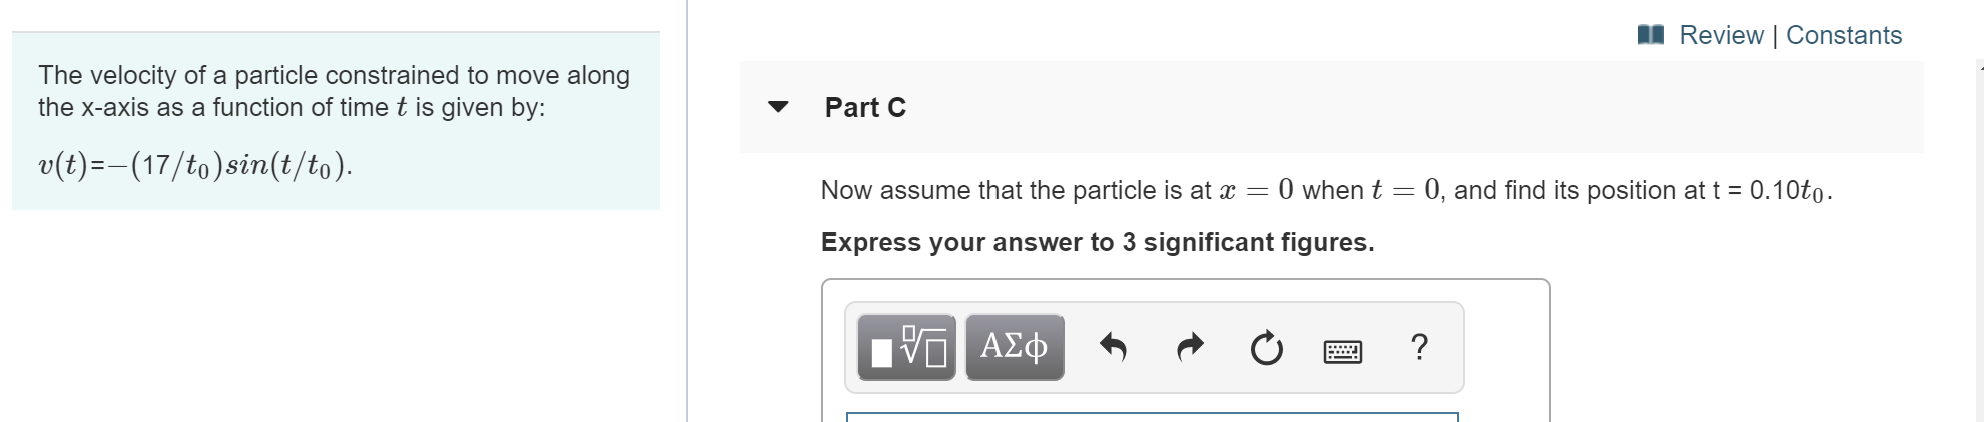 Review | Constants
The velocity of a particle constrained to move along
the x-axis as a function of time t is given by:
Part C
v(t)(17/to)sin(t/to)
Now assume that the particle is at x = 0 when t 0, and find its position at t 0.10to
Express your answer to 3 significant figures.
V ΑΣφ
